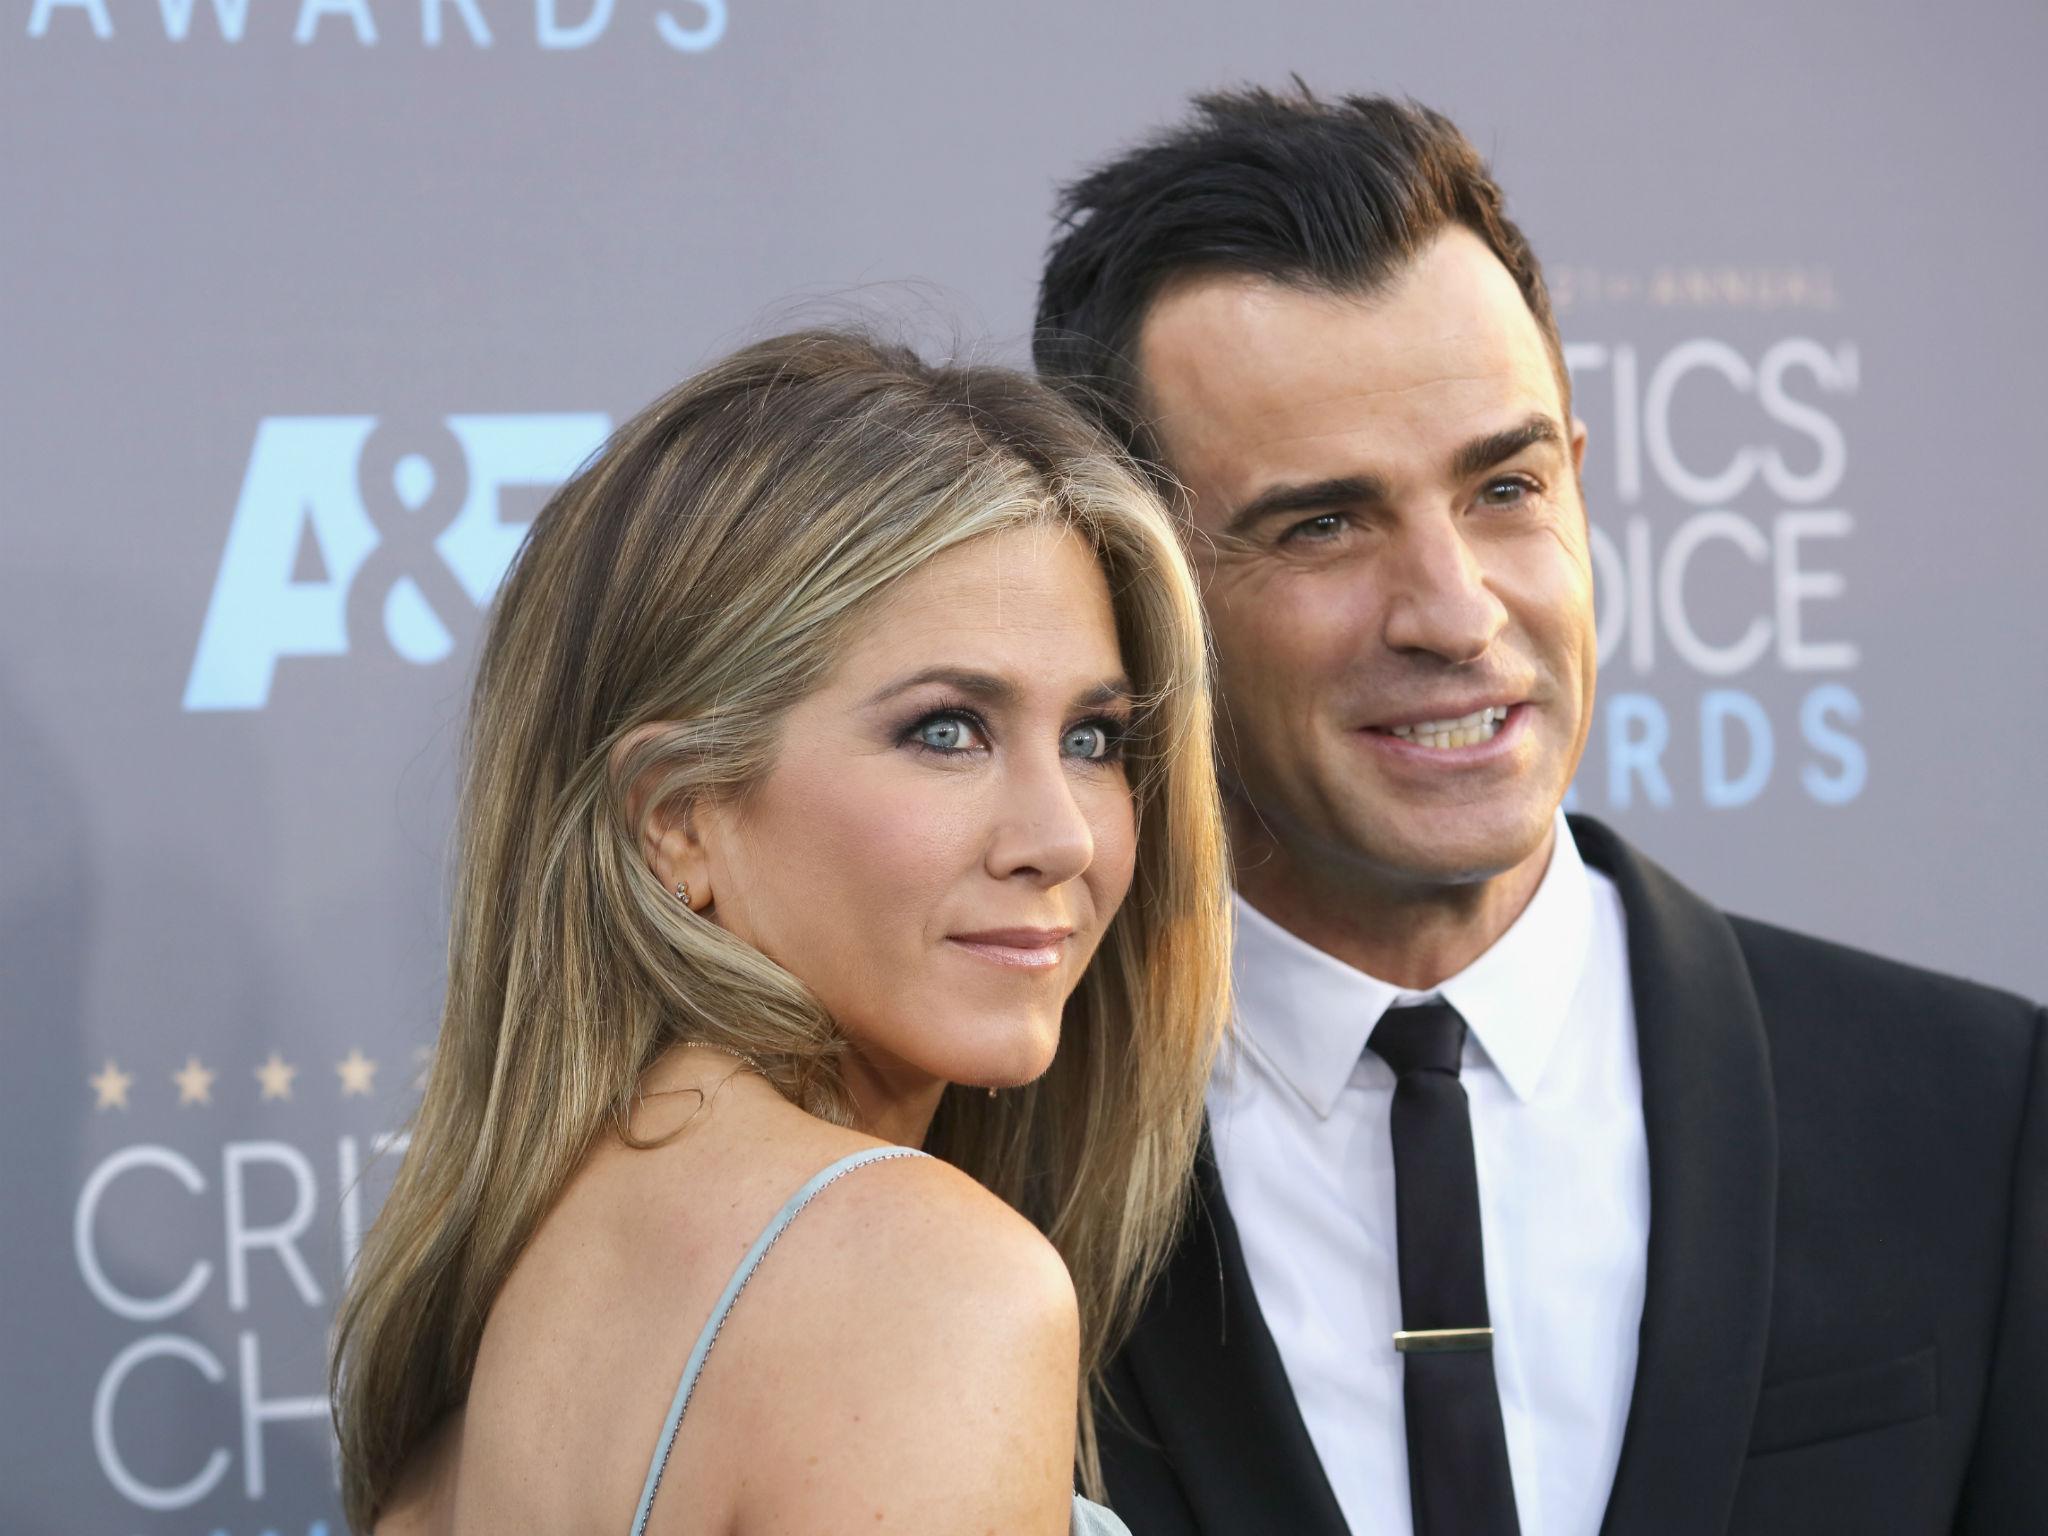 Aniston and Theroux married at an intimate private ceremony at their Bel Air estate in 2015 after already being together for four years